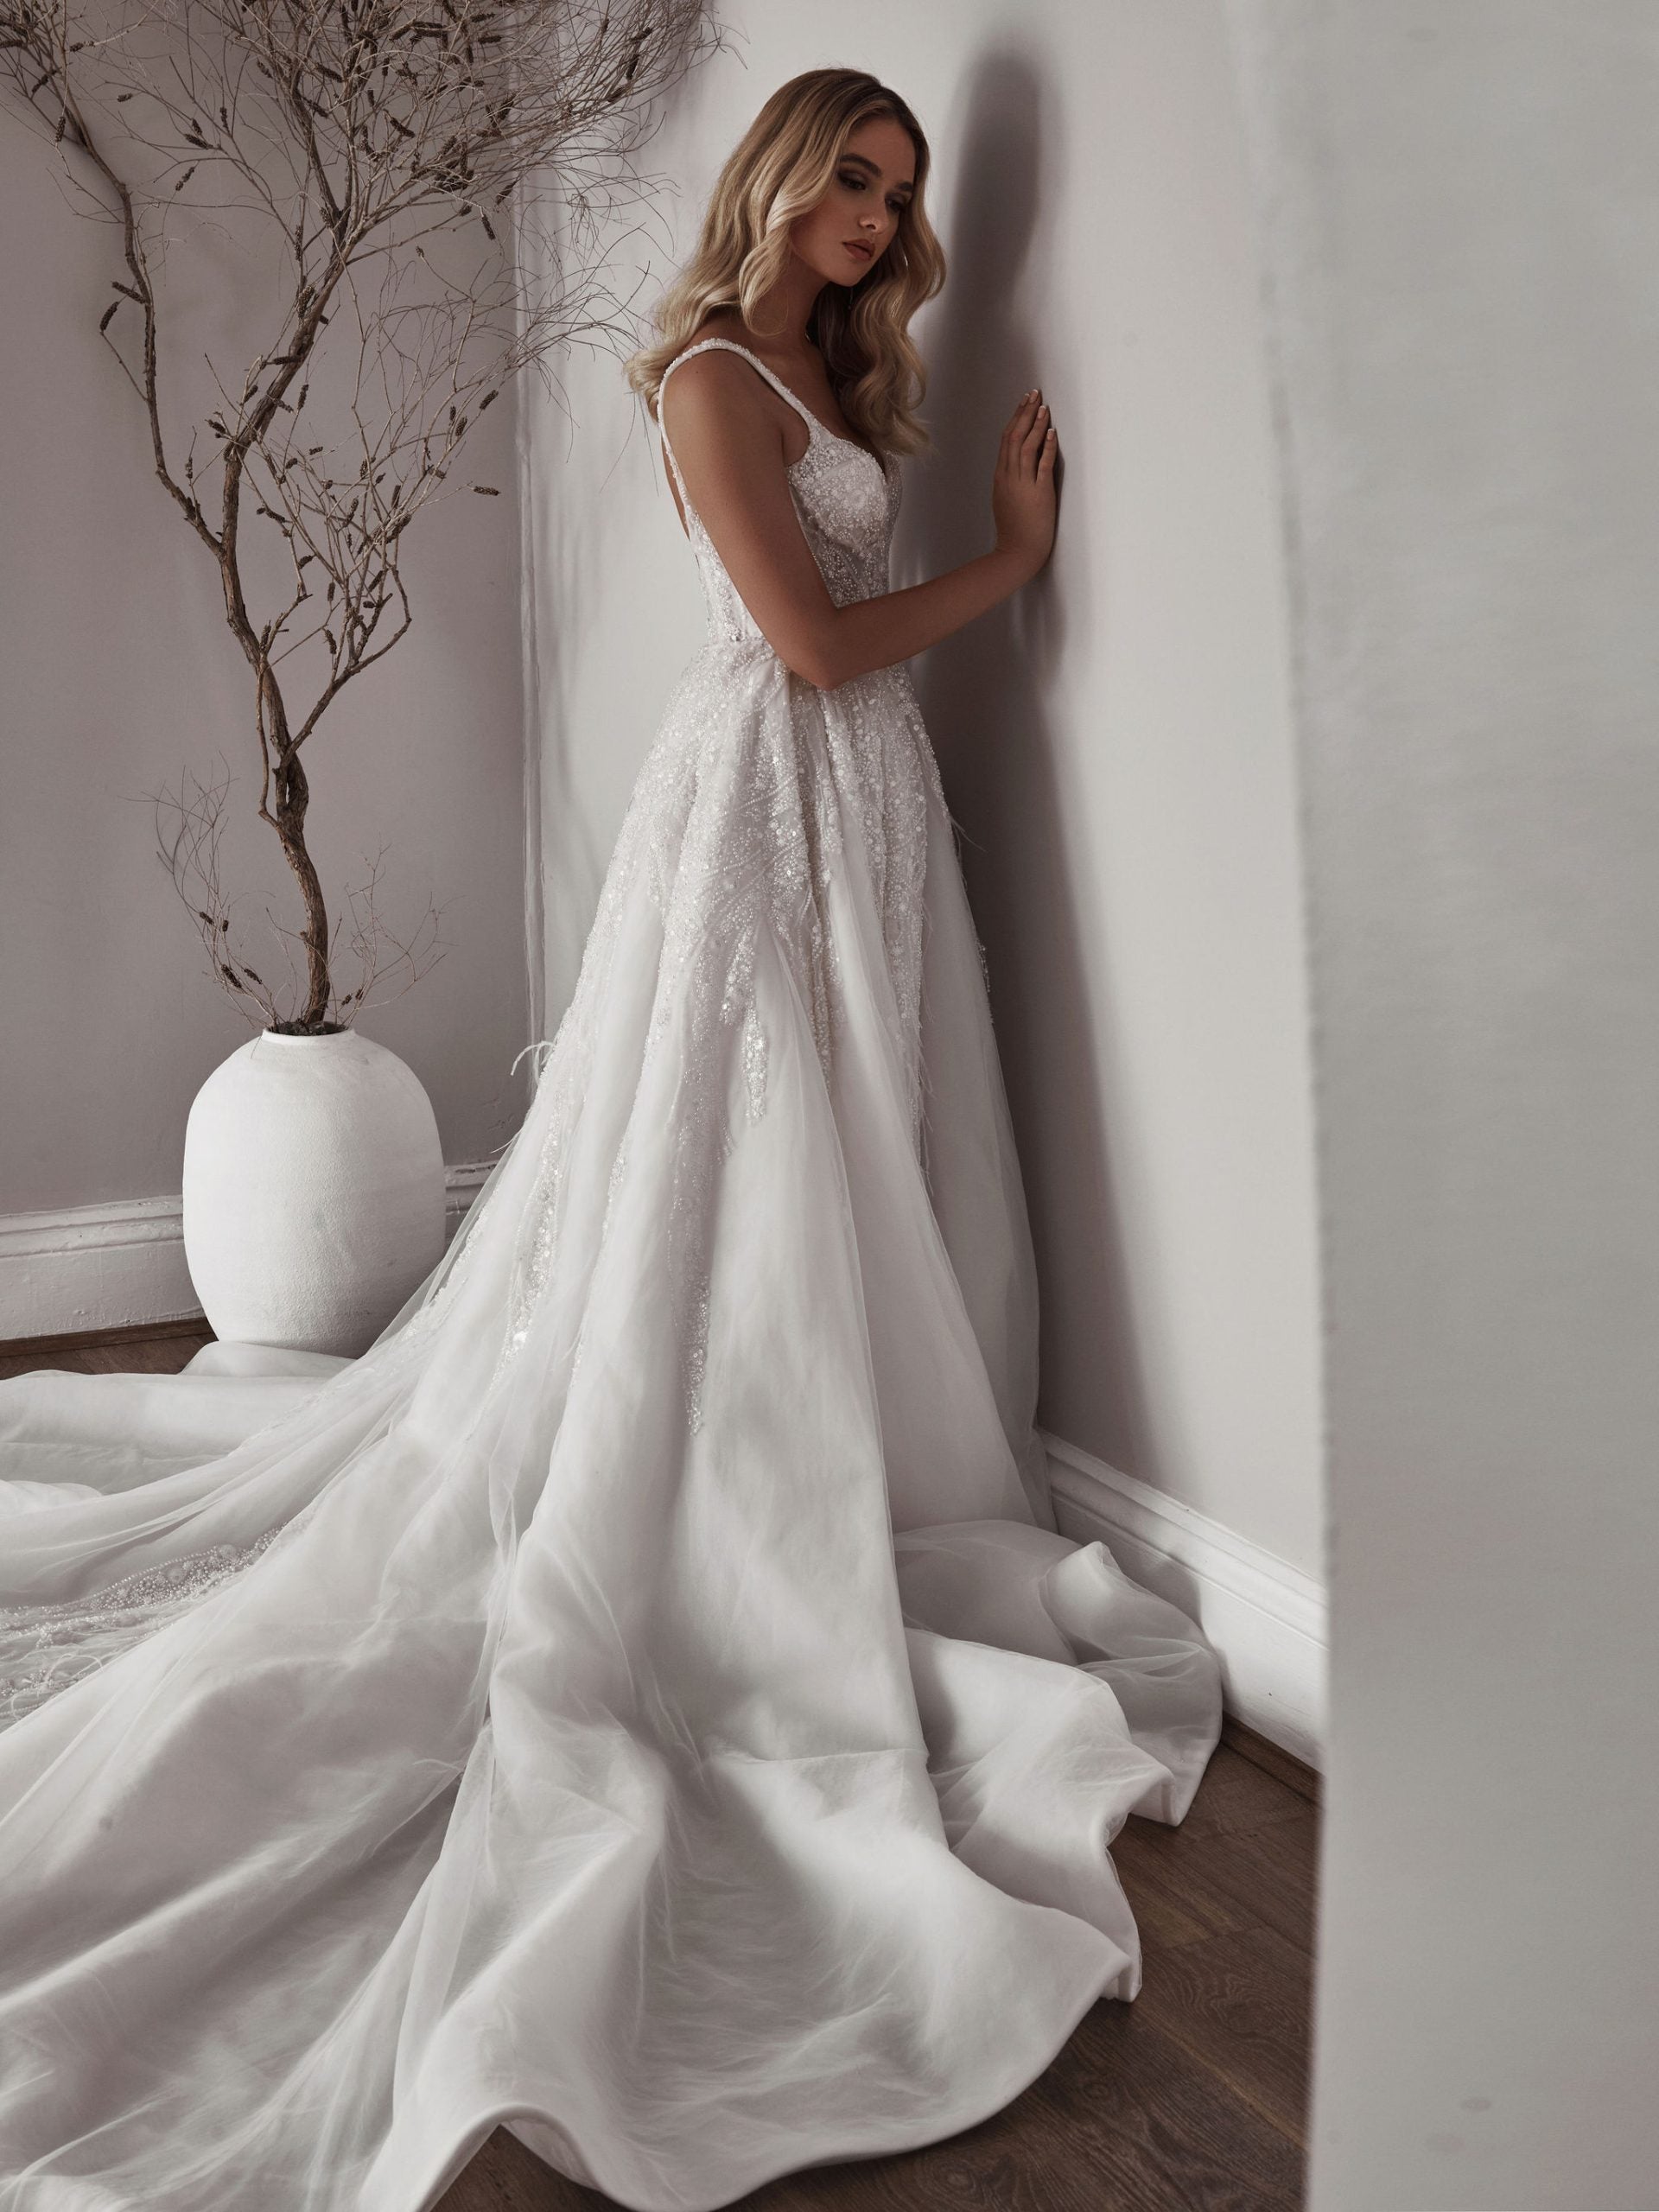 Beaded Detachable Overskirt by Blanche Bridal - Image 2